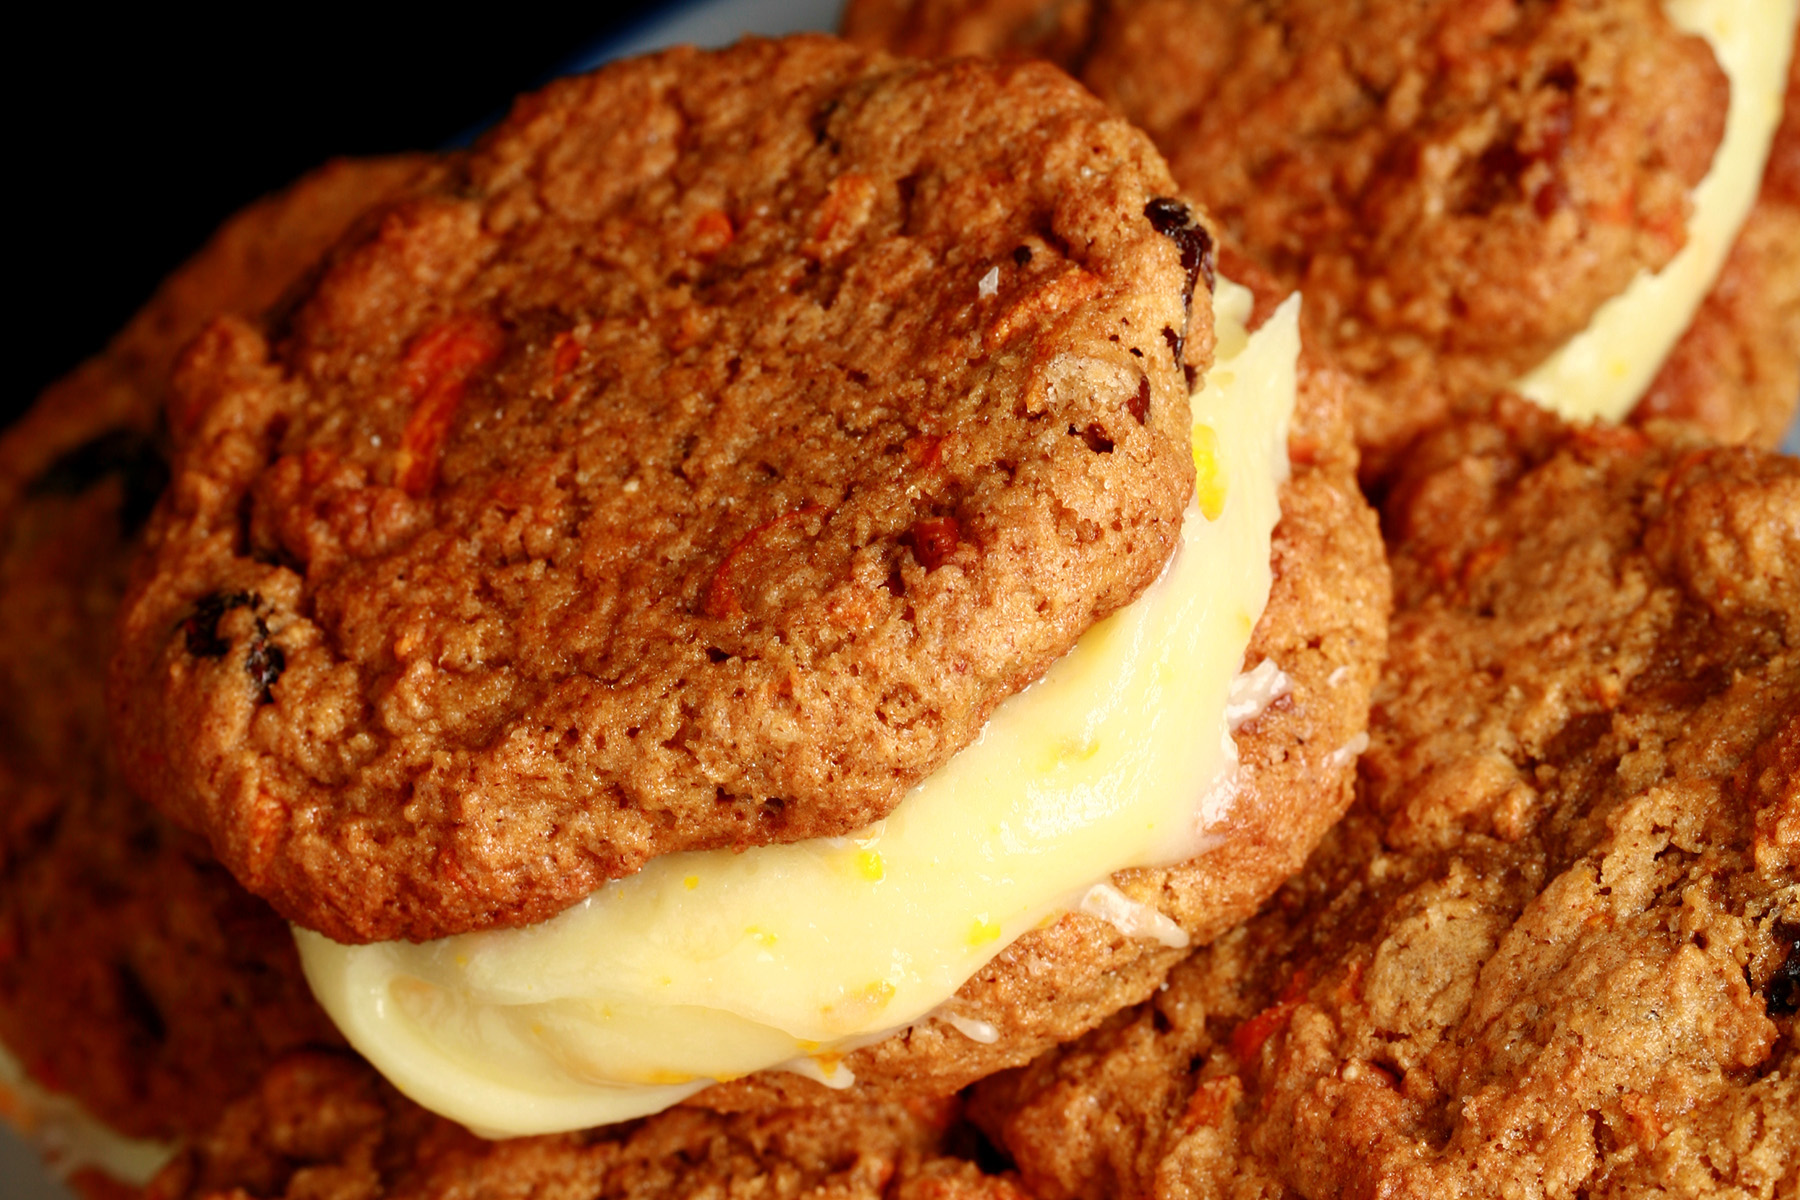 A small blue and white plate with a stack of gluten-free carrot cake cookies on it. The filling is ivory coloured and has flecks of orange zest throughout